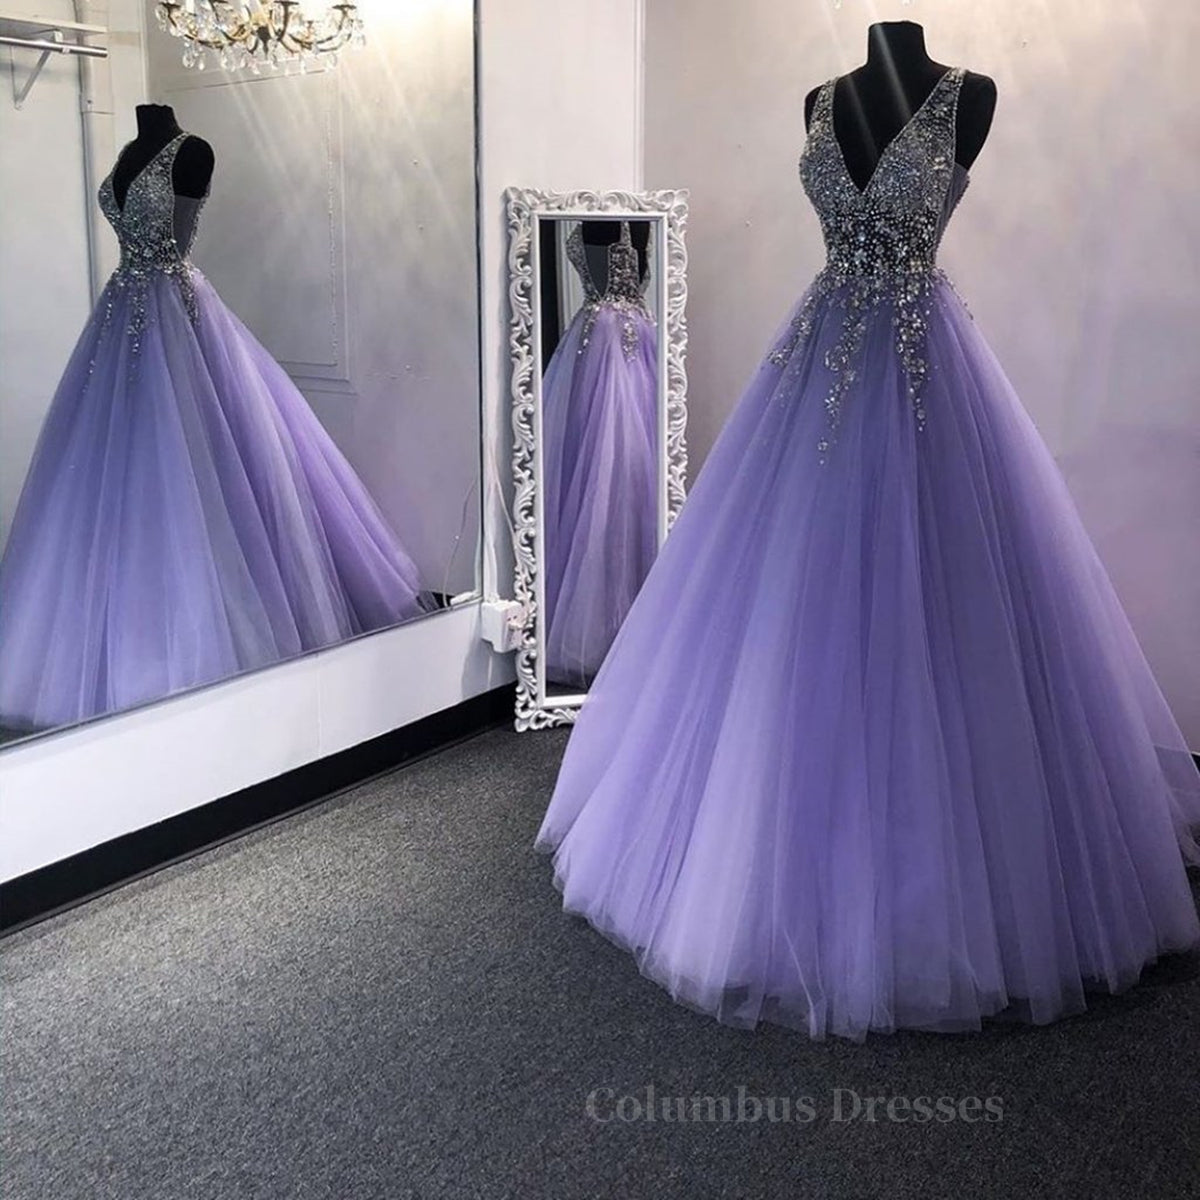 Prom Dress And Boots, Gorgeous V Neck Beaded Purple Tulle Long Prom Dress, V Neck Purple Formal Evening Dress, Purple Ball Gown